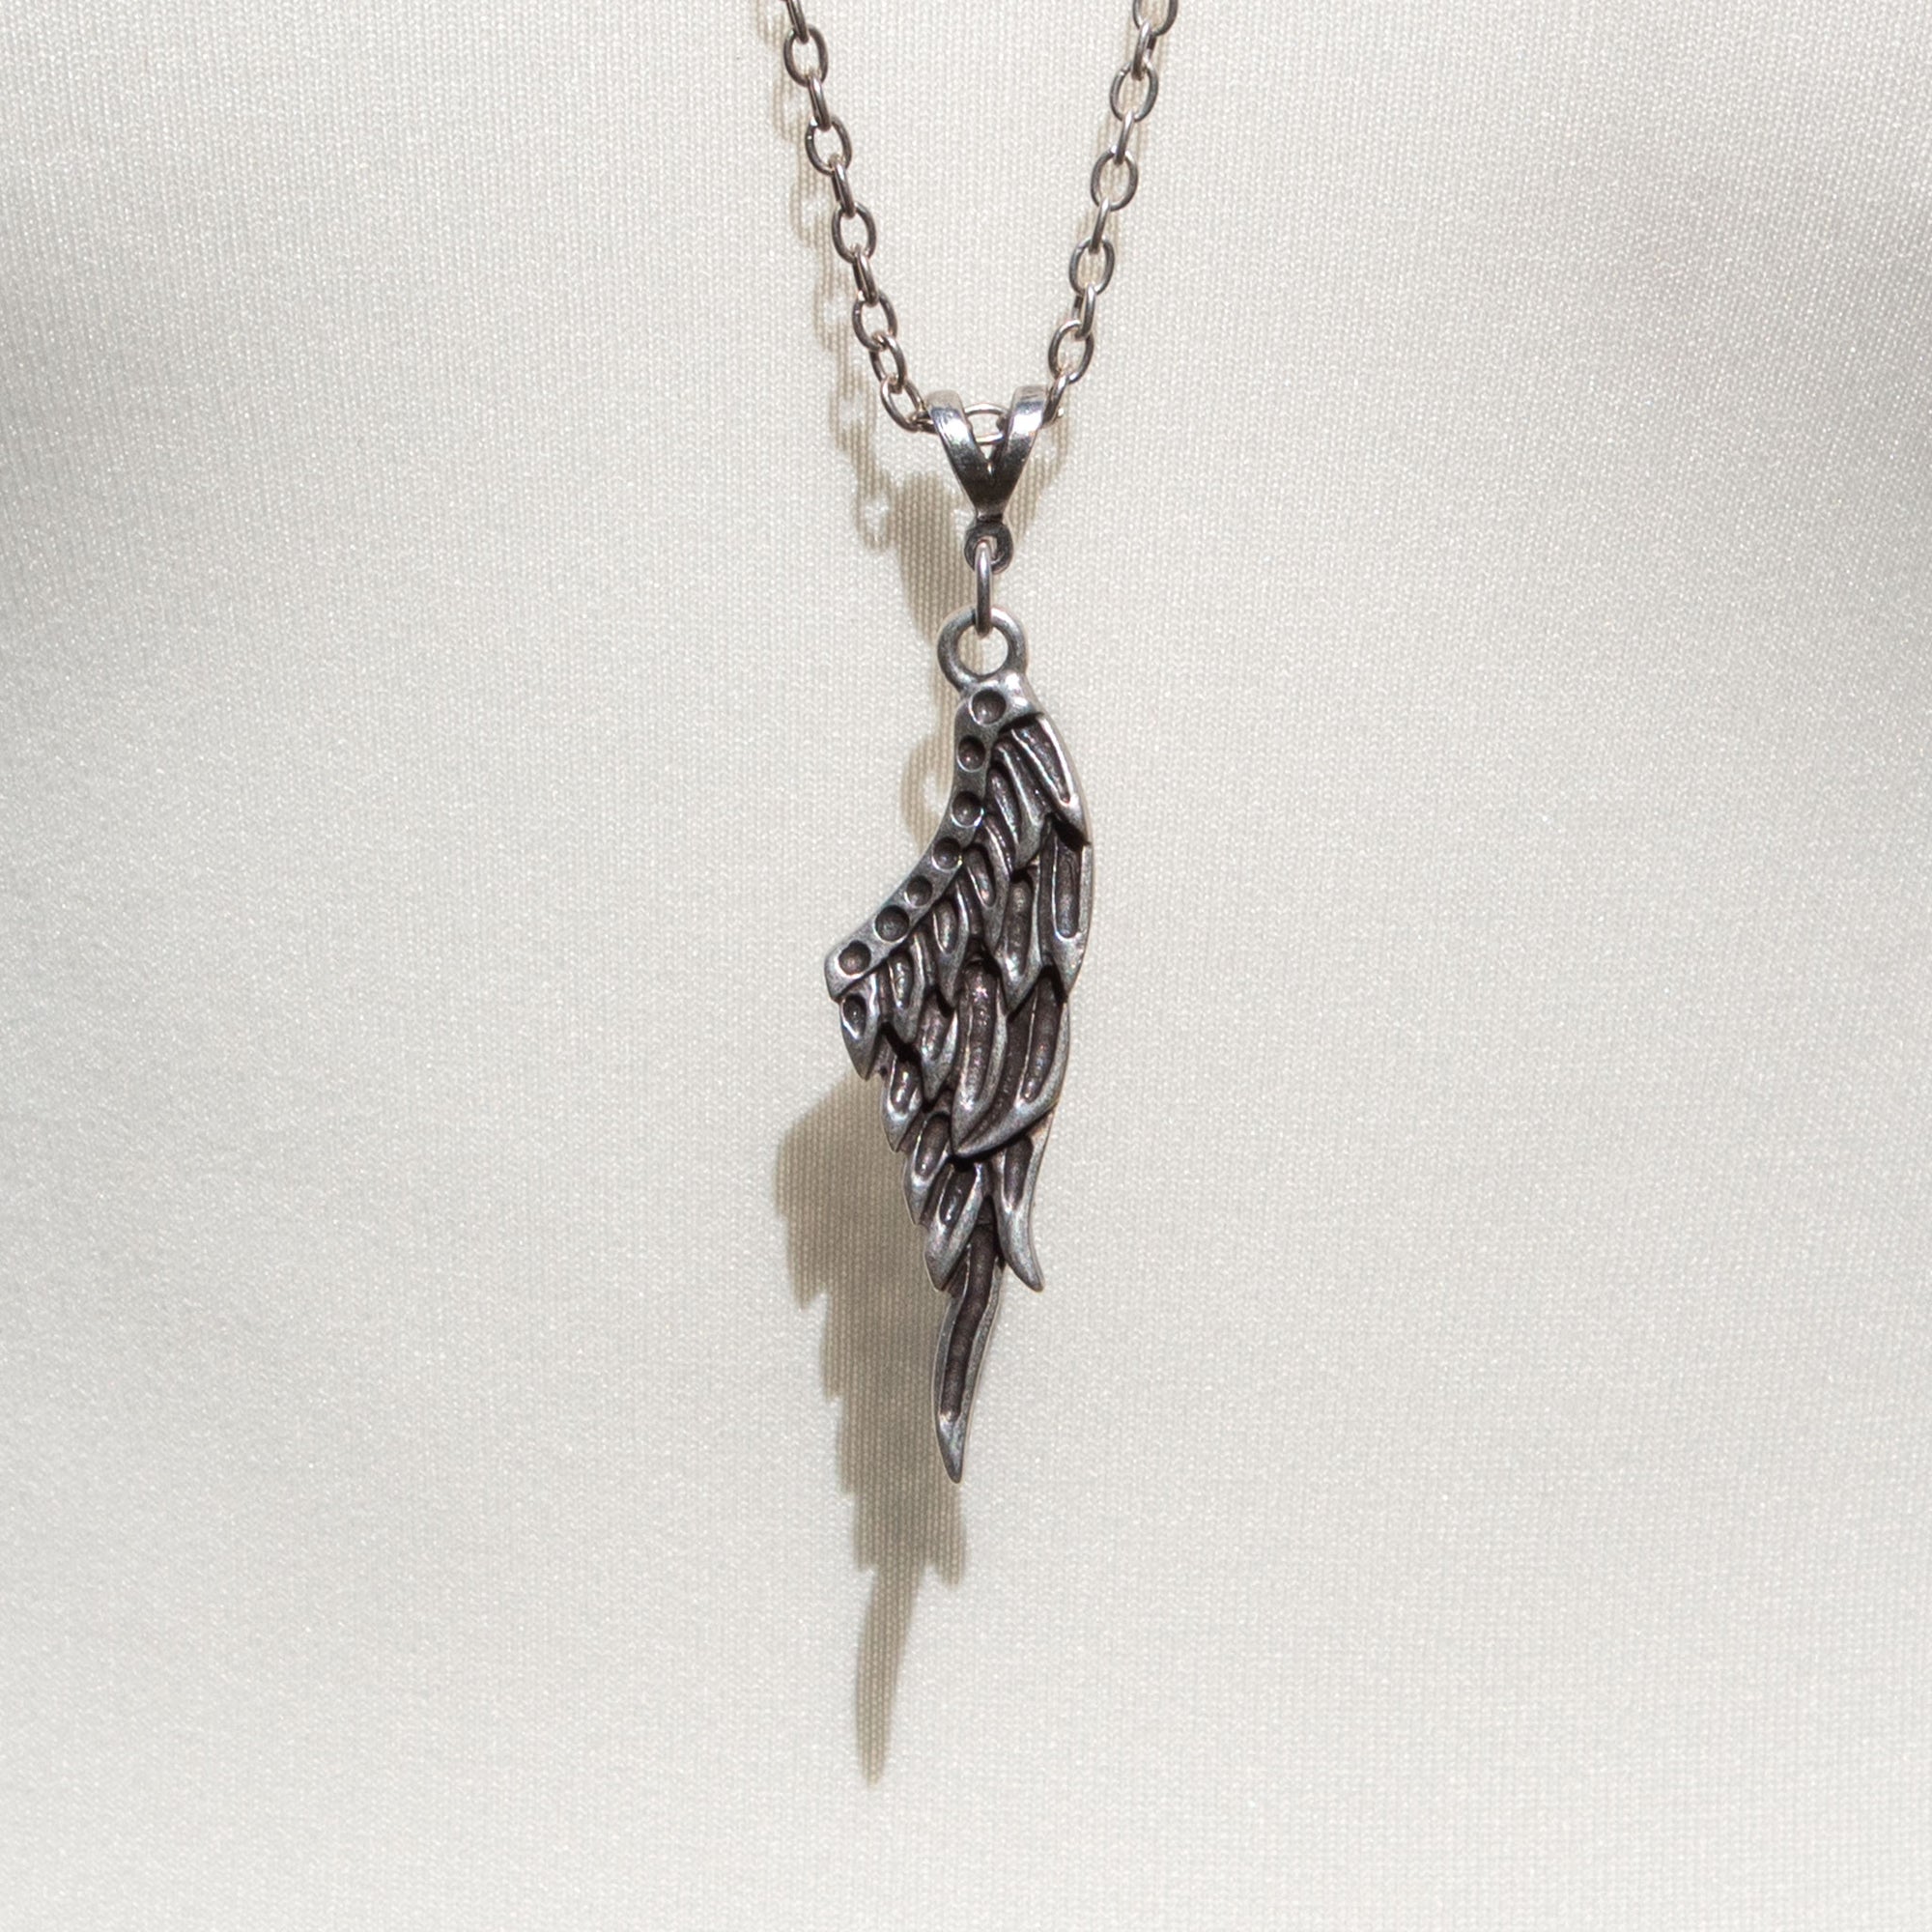 Feathered Wing Pendant Necklace | Necklace - The Naughty Shrew